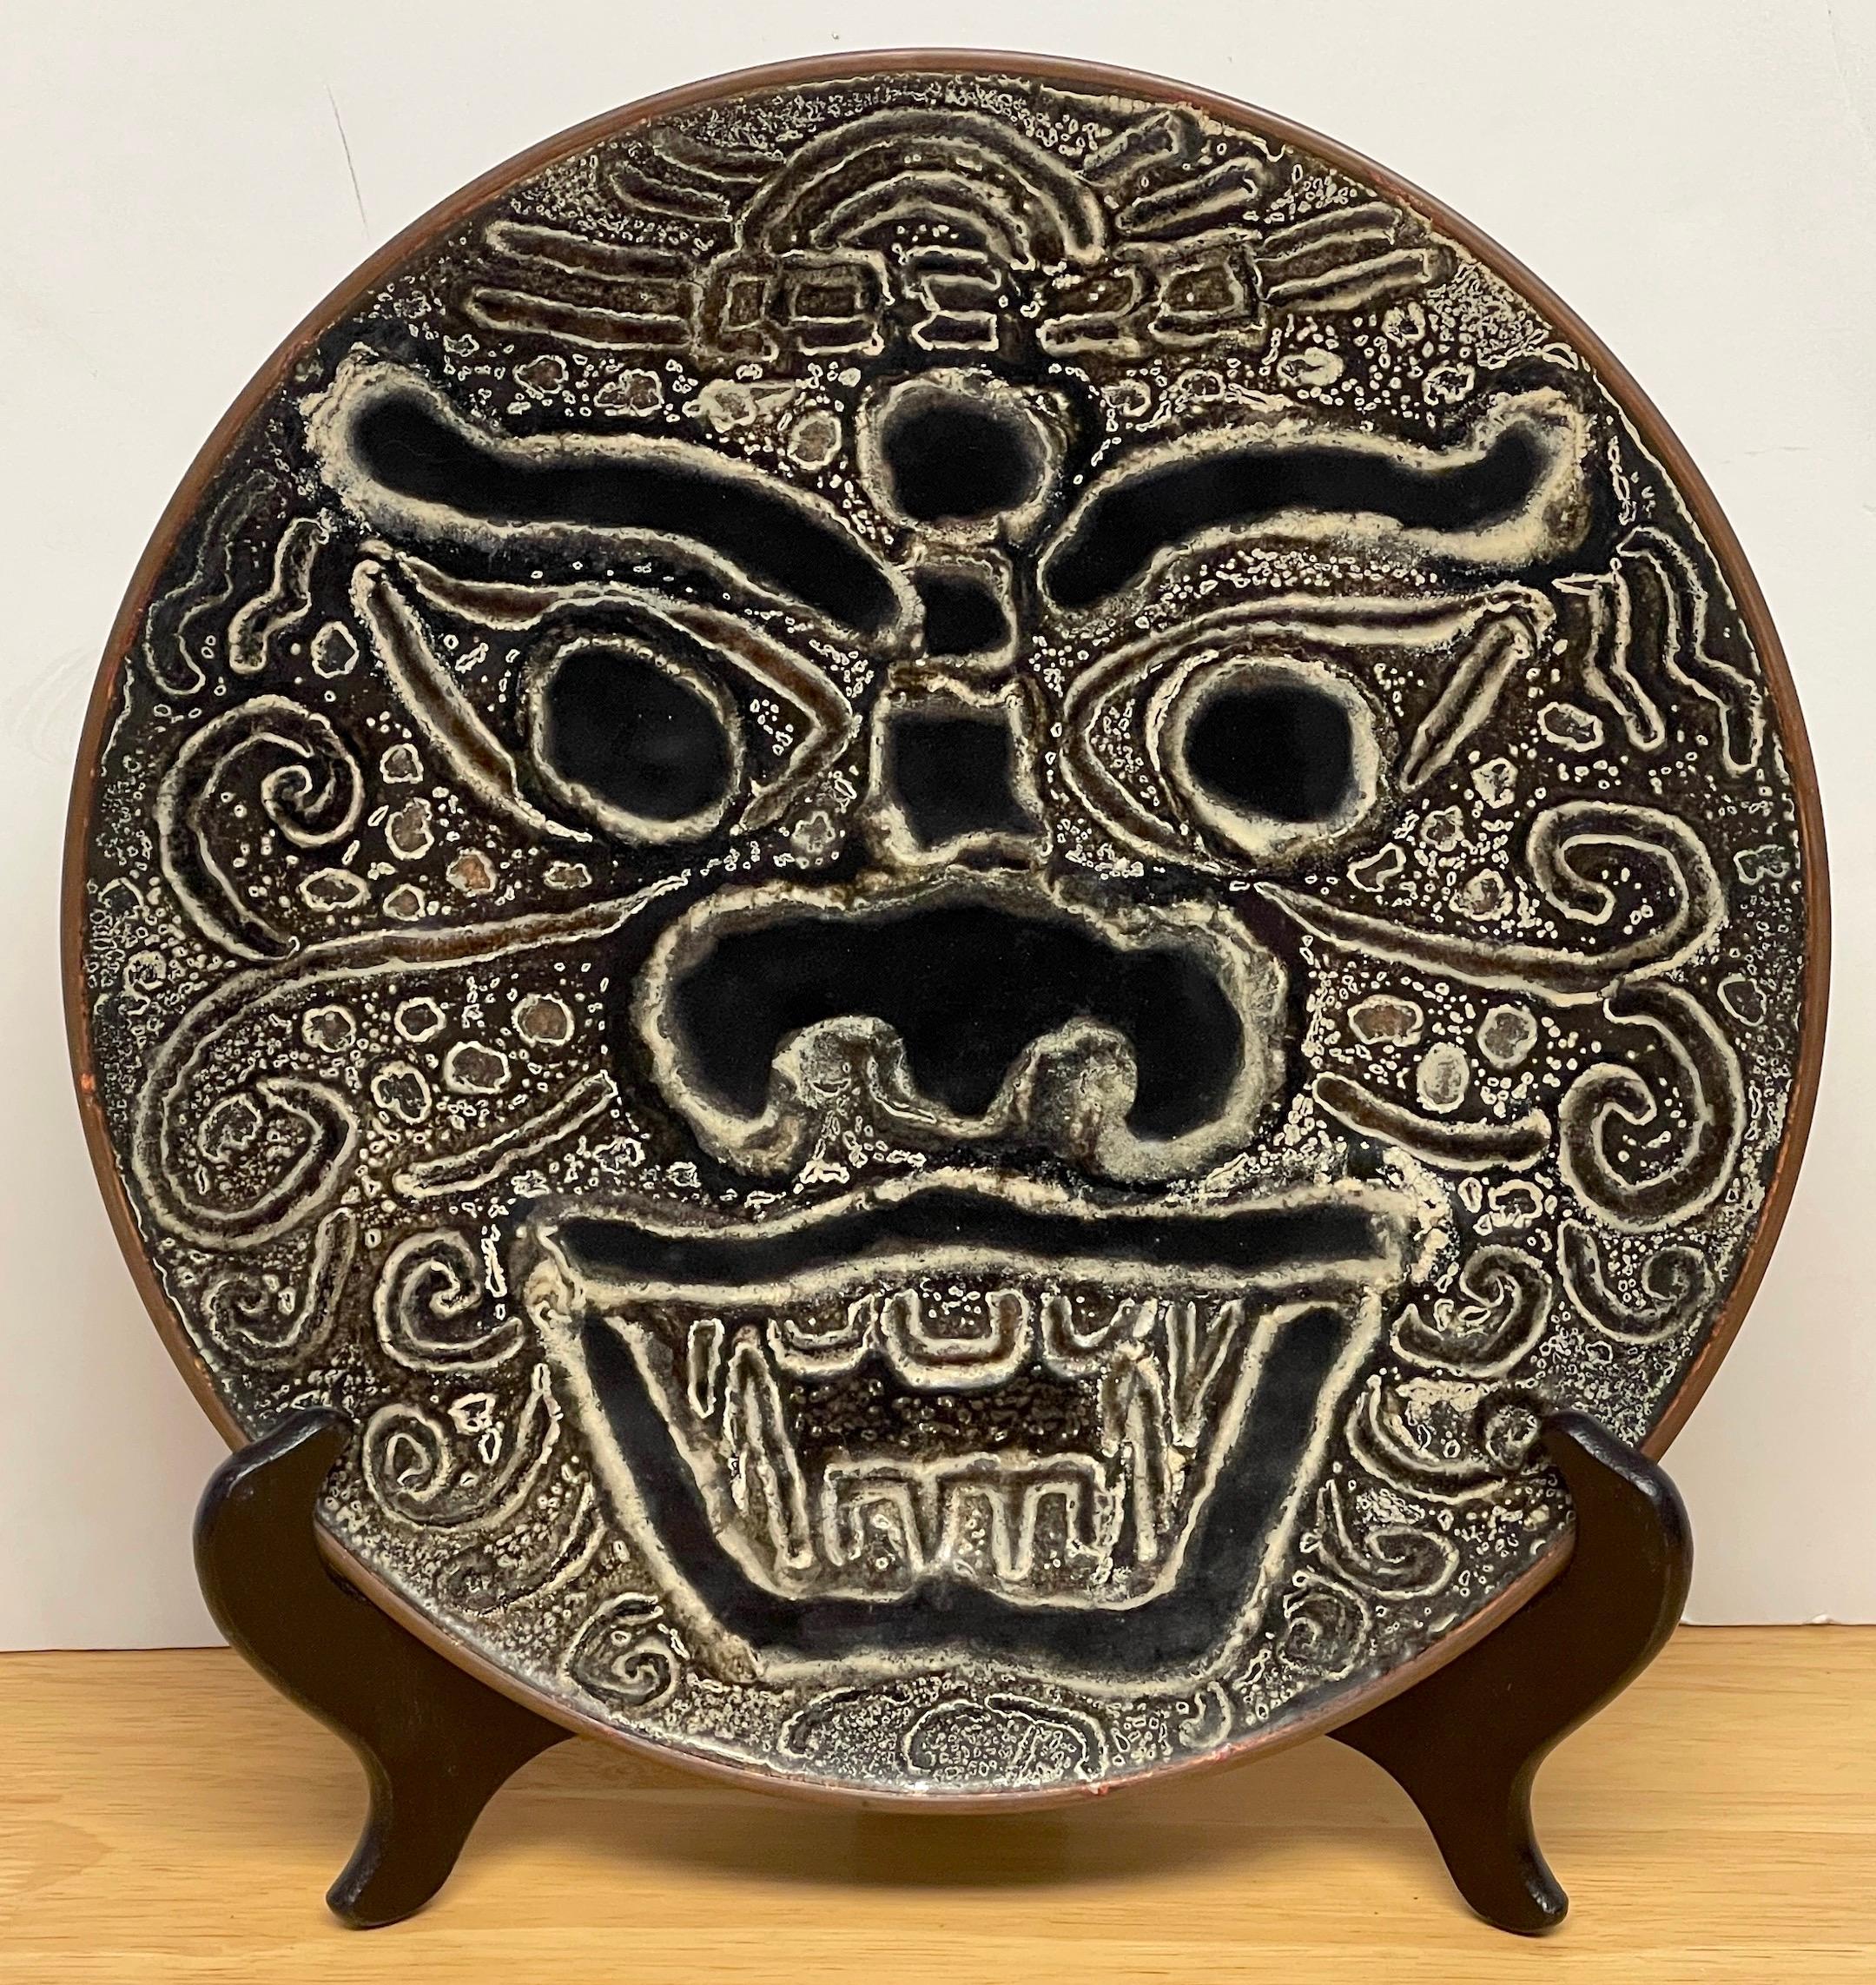 Modern Chinese Export enamel foo dog motif charger with stand 
The profusely enameled portrait plaque of a foo dog, with a Chinese hardwood easel stand. Unmarked.
The charger alone has a 10.5-Inch diameter, displayed on the stand the work stands